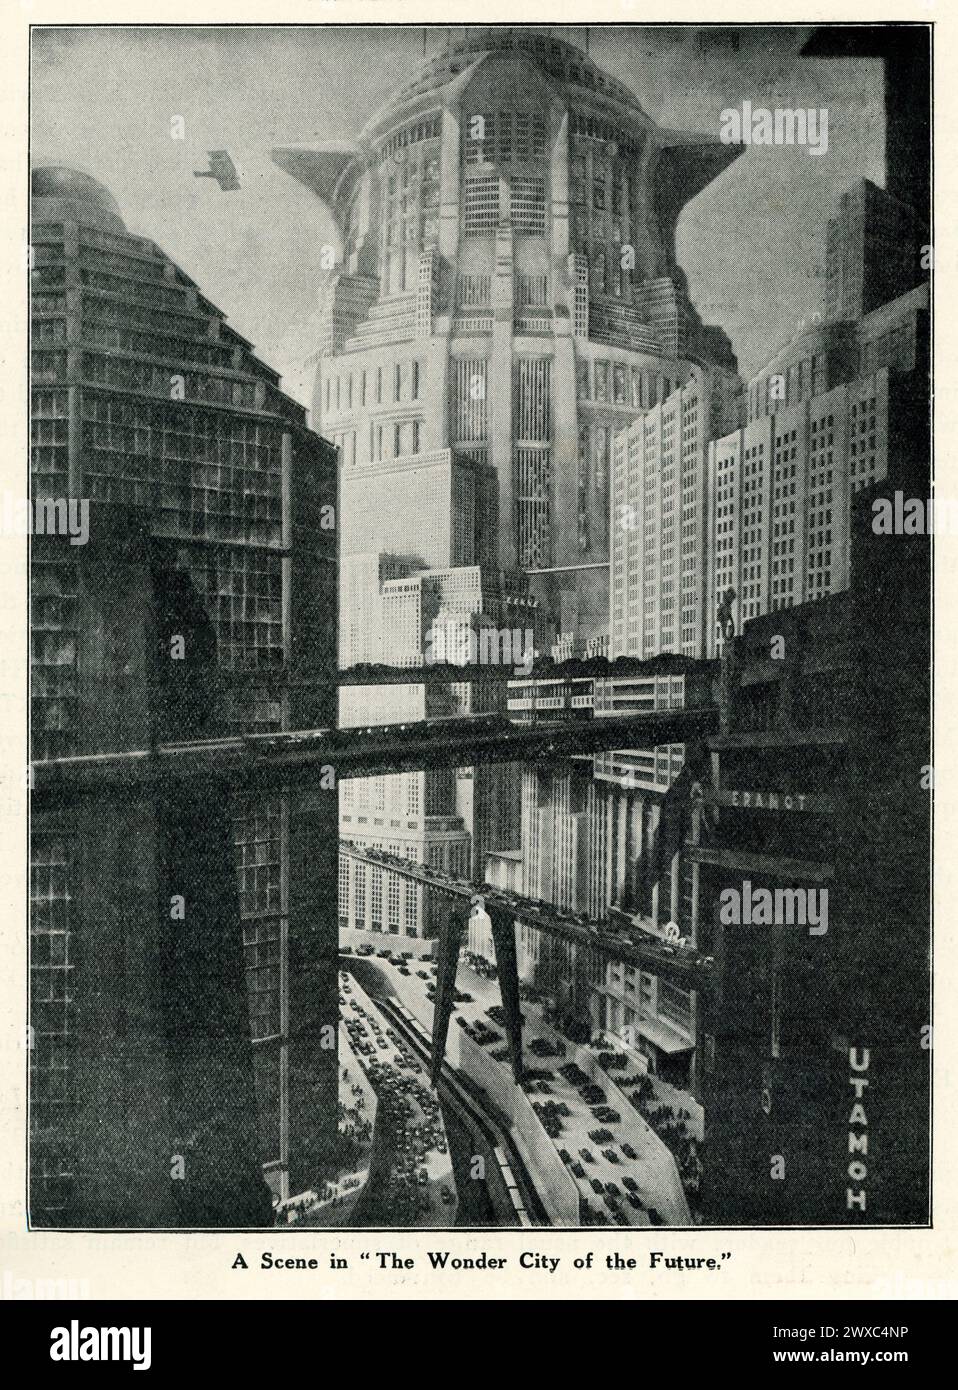 The Wonder City of the Future on page from original release British programme for METROPOLIS 1927 director FRITZ LANG novel and screenplay Thea von Harbou Universum Film (UFA) Stock Photo